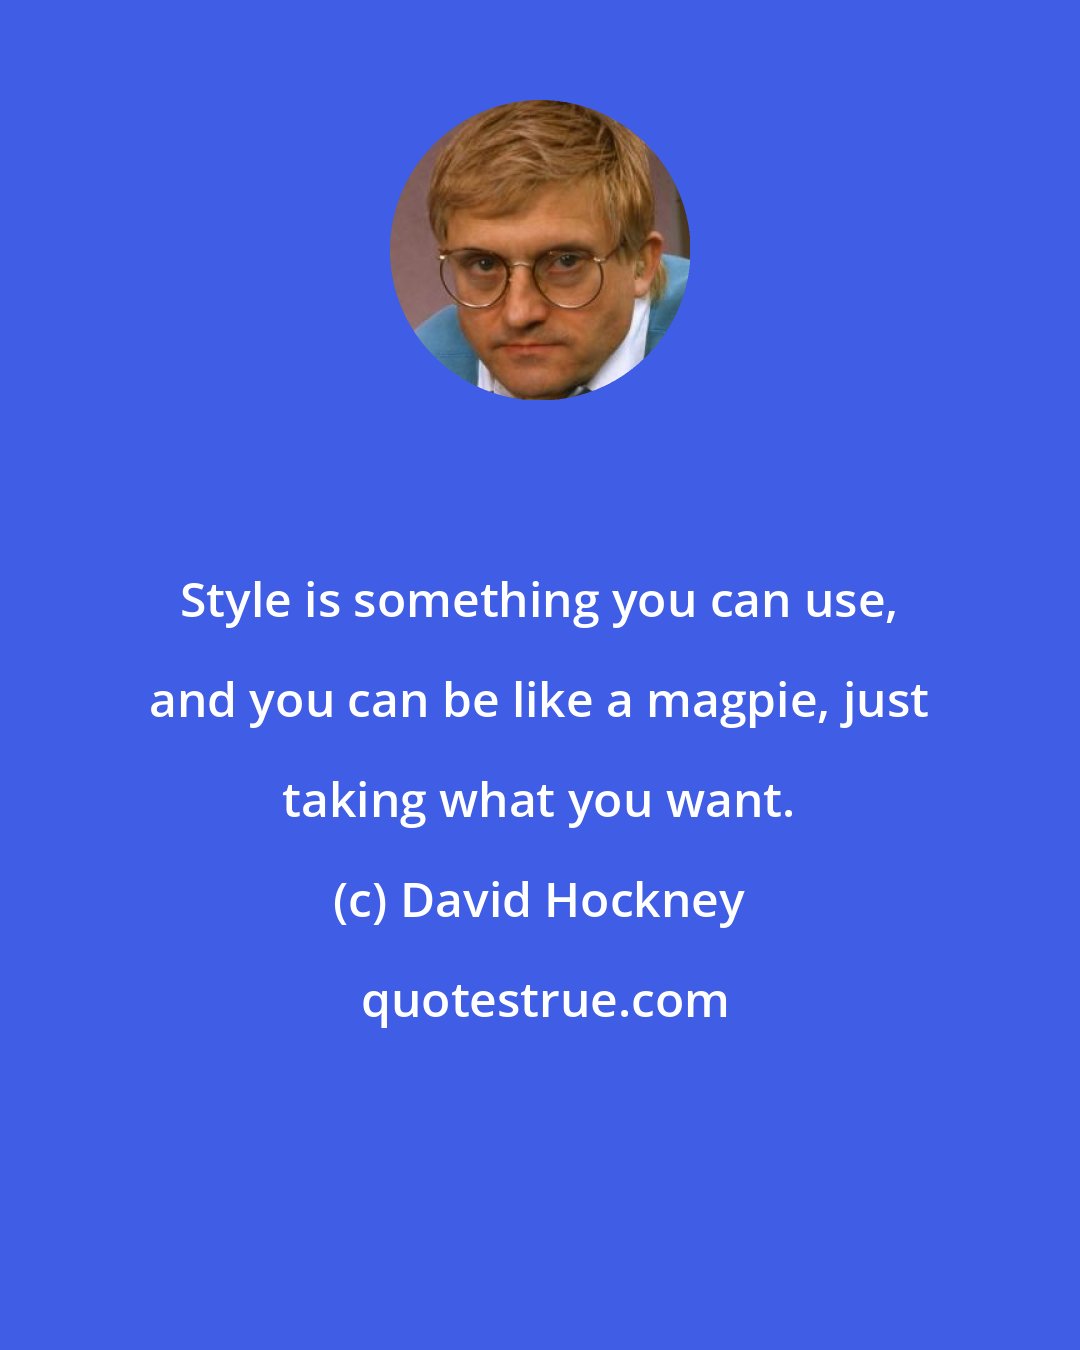 David Hockney: Style is something you can use, and you can be like a magpie, just taking what you want.